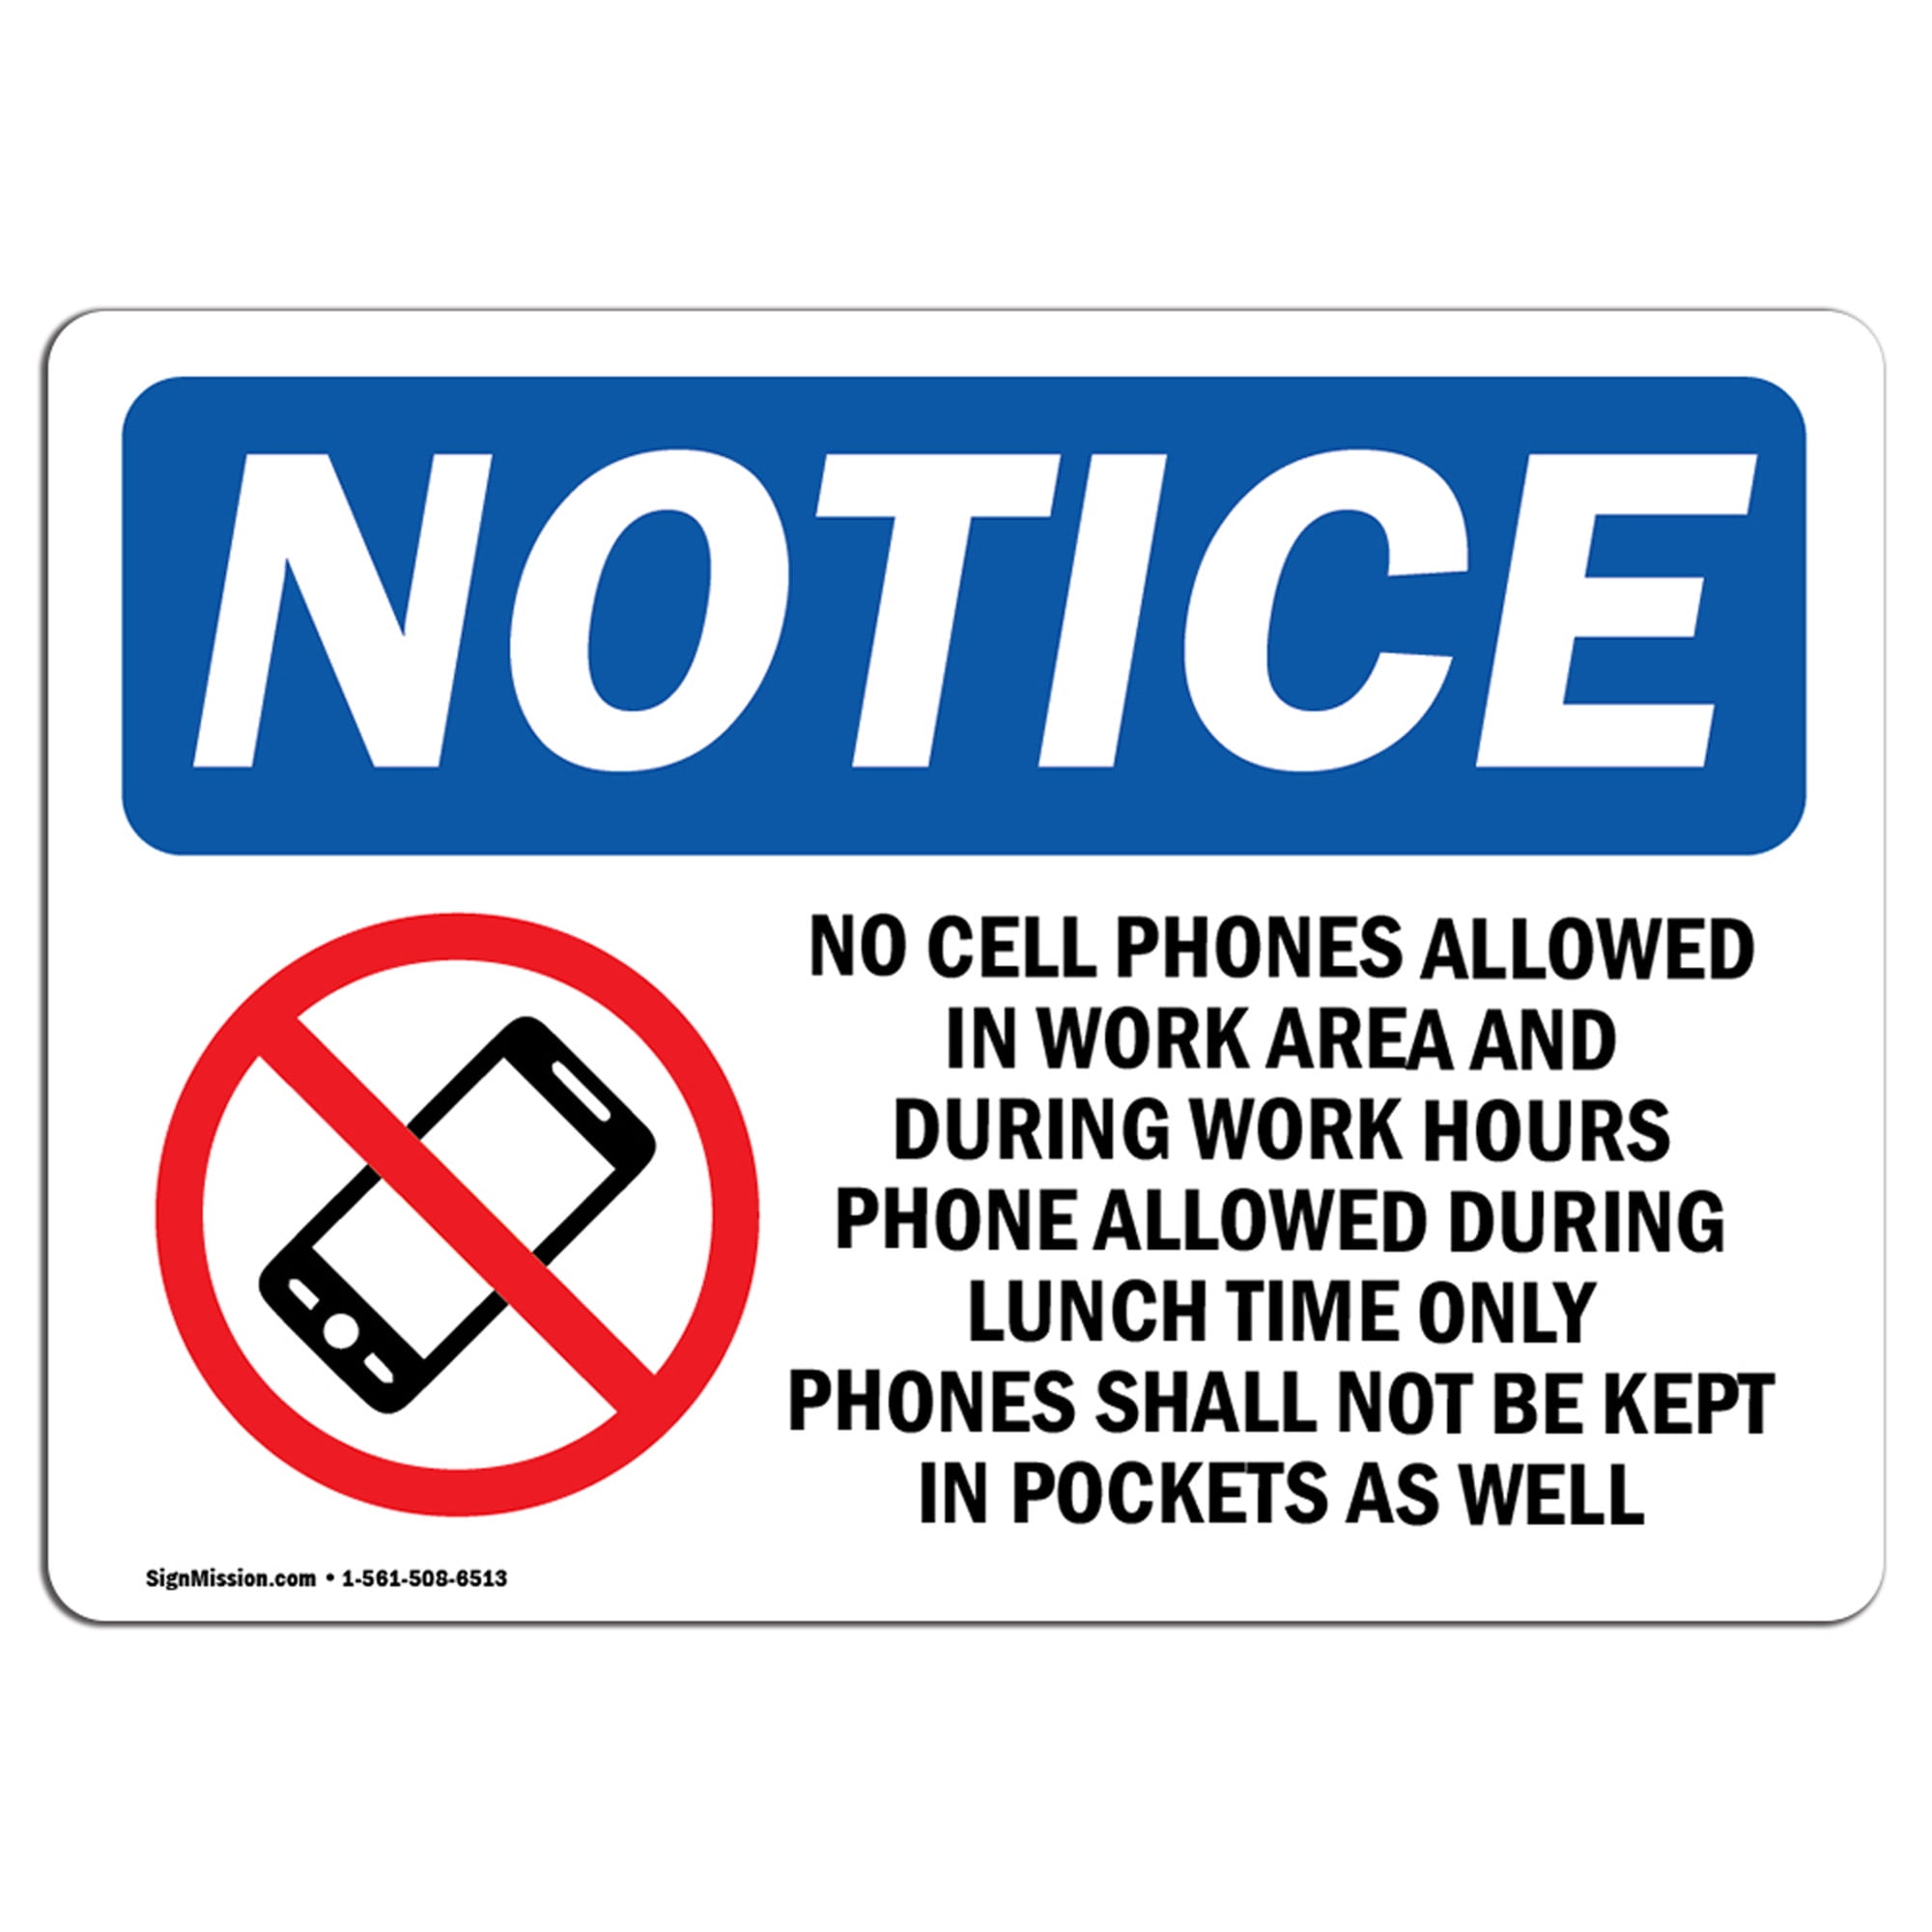 Allowed to work in the. No Phones allowed. Знак Протекта. Cell Phones not allowed. Signs and Notices.